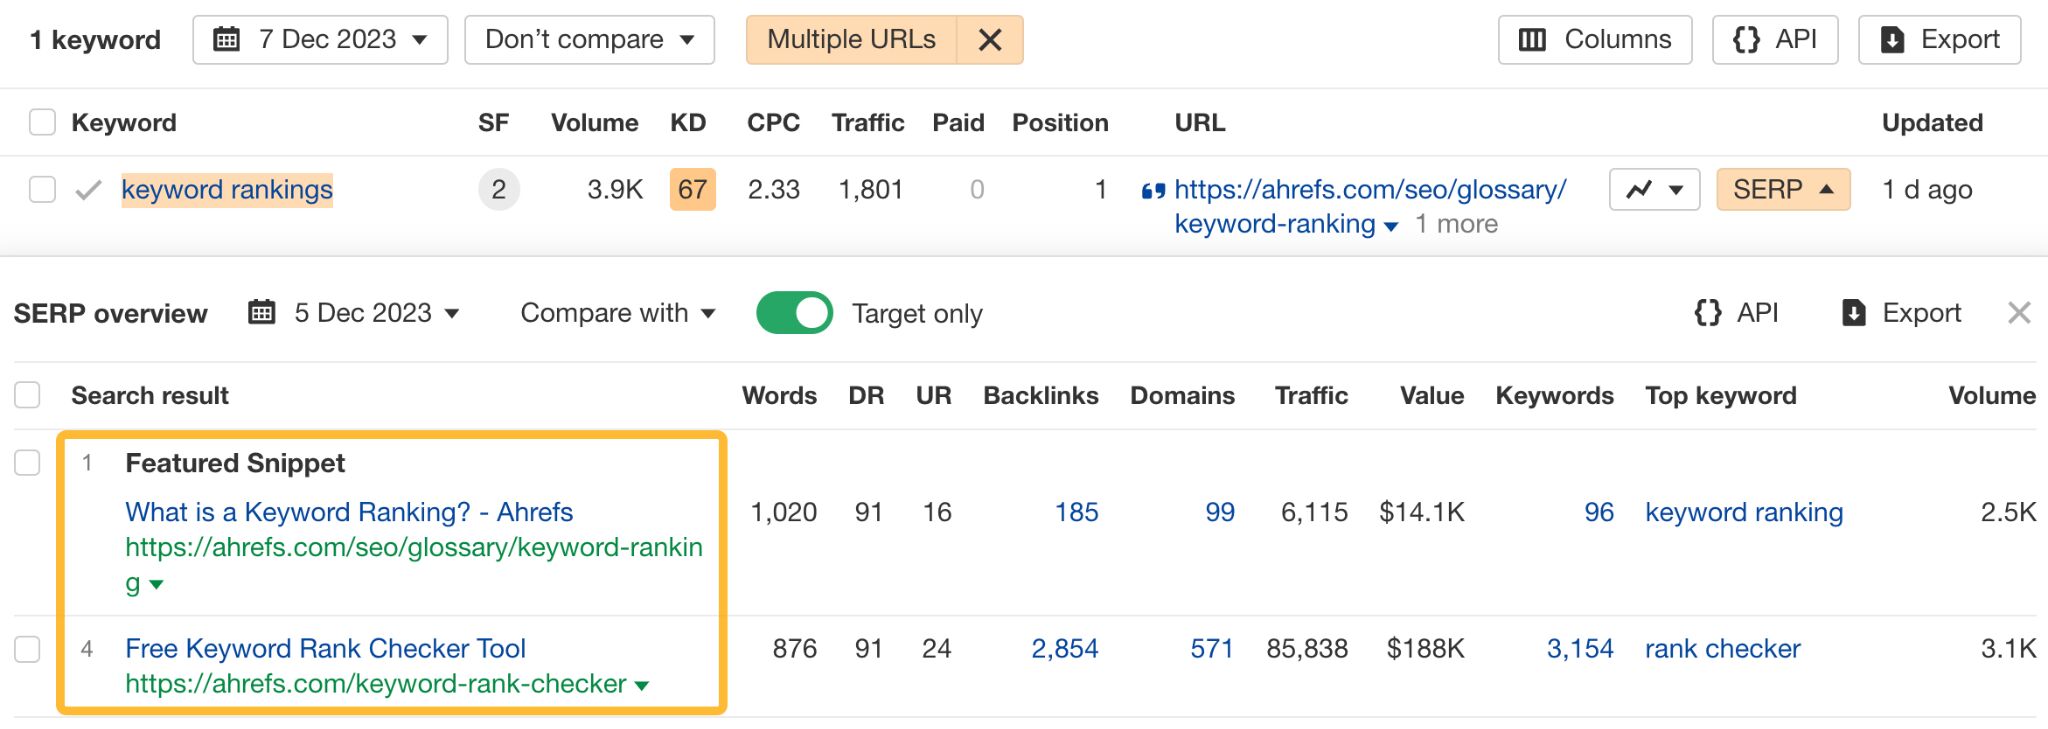 SERP overview for "keyword rankings".